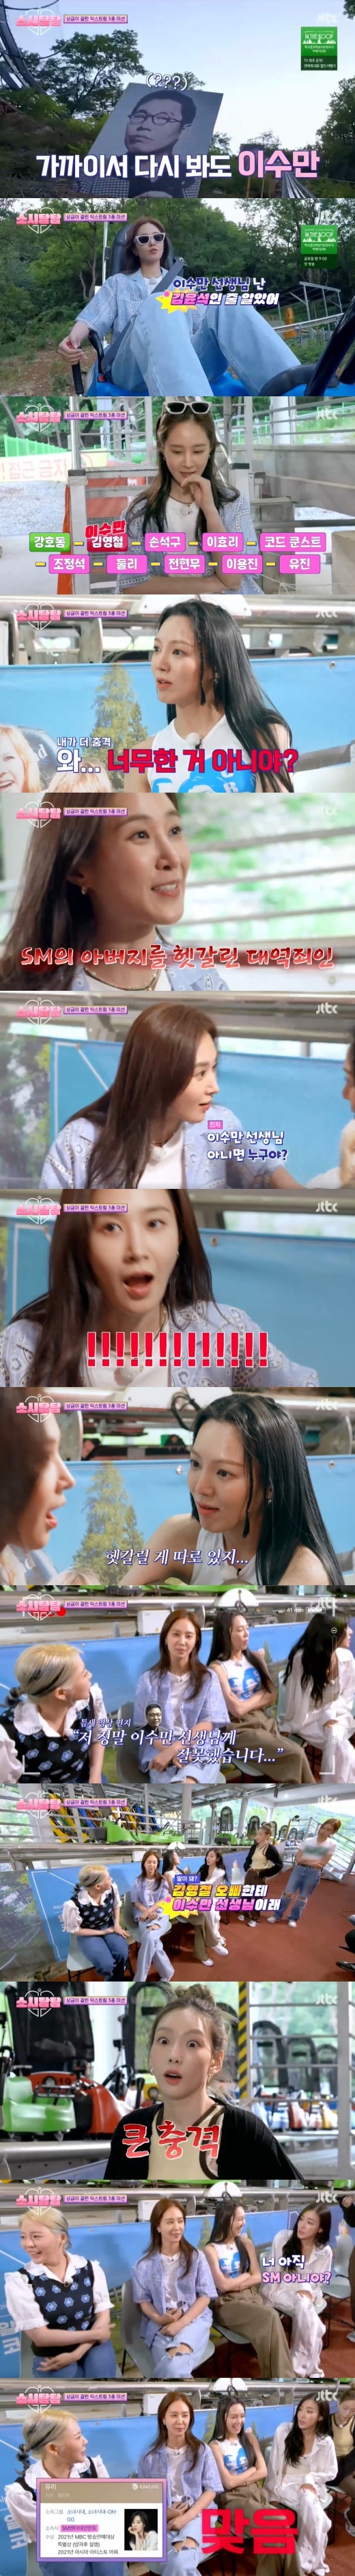 Group Girls Generation Kwon Yuri shocked members with an unexpected mistake.JTBC sositham, a comprehensive channel broadcast on the afternoon of the 19th, was awarded three kinds of Mureung-dong Yoocheonji, which cost 1 million won in prize money.On that day, Yuna left the set first for filming; Seohyun also has not yet joined the filming schedule.The remaining six members chatted on the Socika without hesitation.Hyoyeon looked back over the past time, saying, Ive seen us 22 years since I was a trainee, and Sooyoung quipped, Im sick. Lets stop.The first mission was a mission to sing a combination of letters on the ground in a sky glider that glides through the window.The members were divided into the Sooyoung team and the Kwon Yuri team, but only the Sooyoung team applicants were crowded with the stupid appearance of Kwon Yuri.In particular, Sunny said, I just did LASEK. He laughed at his eyesight by appealing.In the memory game, Kwon Yuris small mistake has become a highlight.It was a mission to overcome the speed of the Alpine Coaster and to take the 10 portraits on the uphill in order.Photos of Kang Ho-dong, Kim Young-chul, Son Seokgu, Lee Hyo-ri, Code Kunst, Kang Suk Suk, Dooly, Jeon Hyun-moo, Lee Yong-jin and Eugene were placed next to the rail.Kwon Yuri, who was only a spare, was convinced that he was Lee Soo-man when he saw Kim Young-chul photos.I thought it was Kim Yoon-seok, but I can not do it because I can not memorize it.Kwon Yuri confidently hit the other nine, but was embarrassed when Ding was shouted at Lee Soo-man, who said: Isnt it too much?I could not hide my absurd expression, and Kwon Yuri was surprised to say, Are you wrong with Lee Soo-man? I am Lee Soo-man or who is it? Tiffany Young, who saw this, laughed, saying, Are you still in SM (entertainment)? And Kwon Yuri said, Mr. Lee Soo-man is really sorry.Kim Young-chul, Im sorry. Im really wrong with you two. Currently, SM Entertainment members are Taeyeon, Sunny, Hyoyeon, Kwon Yuri, Yuna, Sooyoung is a human entertainment company, and Seohyun is a tree actor.Tiffany is an independent.Meanwhile, the prize money of 1 million won went to the co-ranked Hyoyeon and Taieon.However, the prize money box was empty, and the reasoning game to catch Devil who stole 1 million won out of 8 members started in earnest.